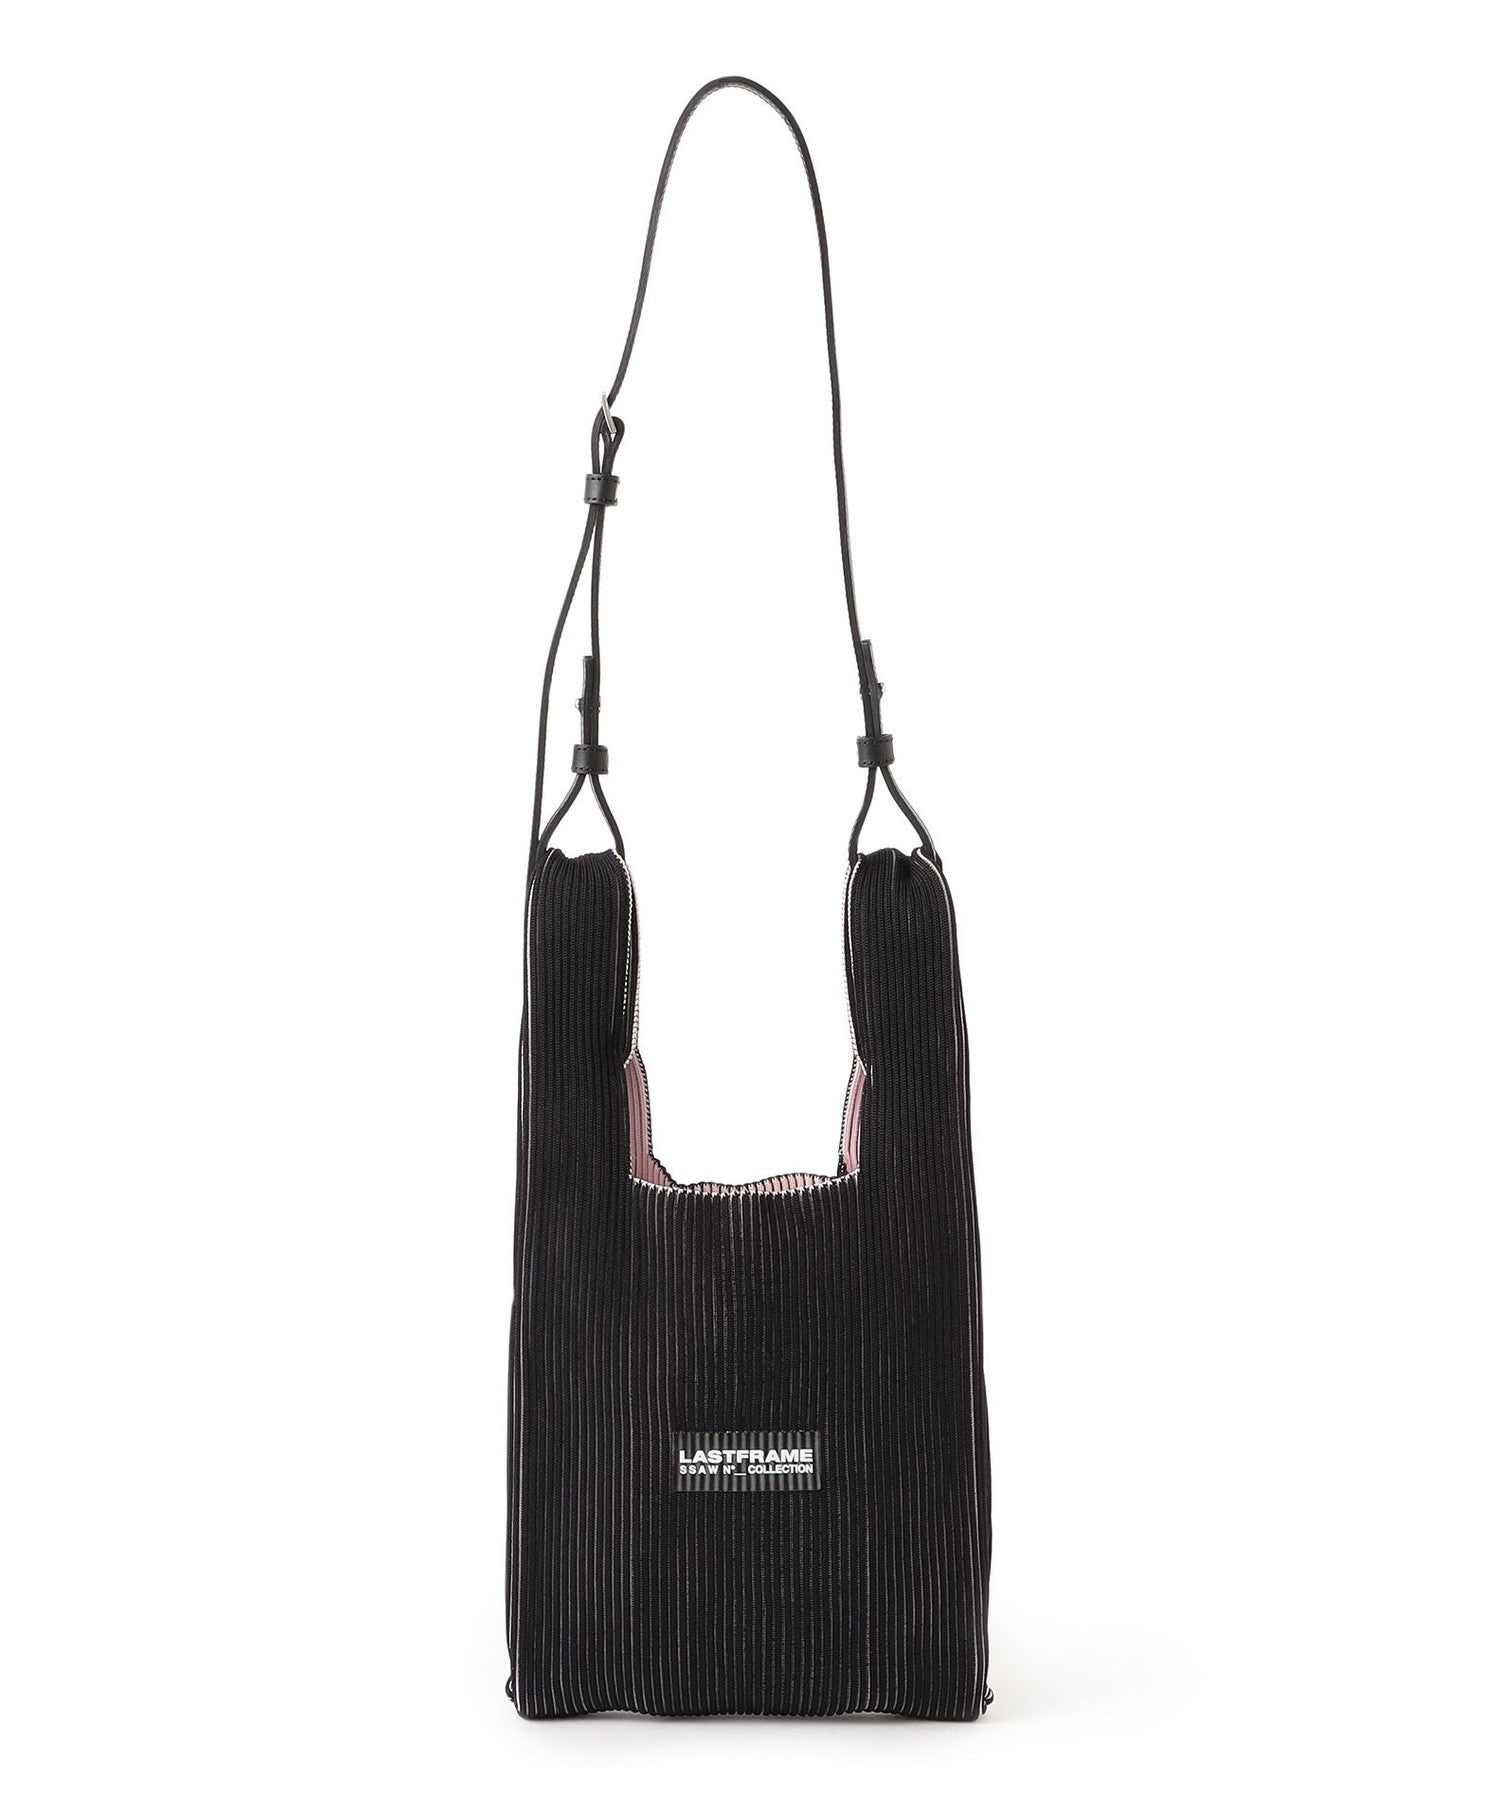 LASTFRAME】トートバッグ TWO TONE MARKET BAG SMALL L23216(バッグ ...